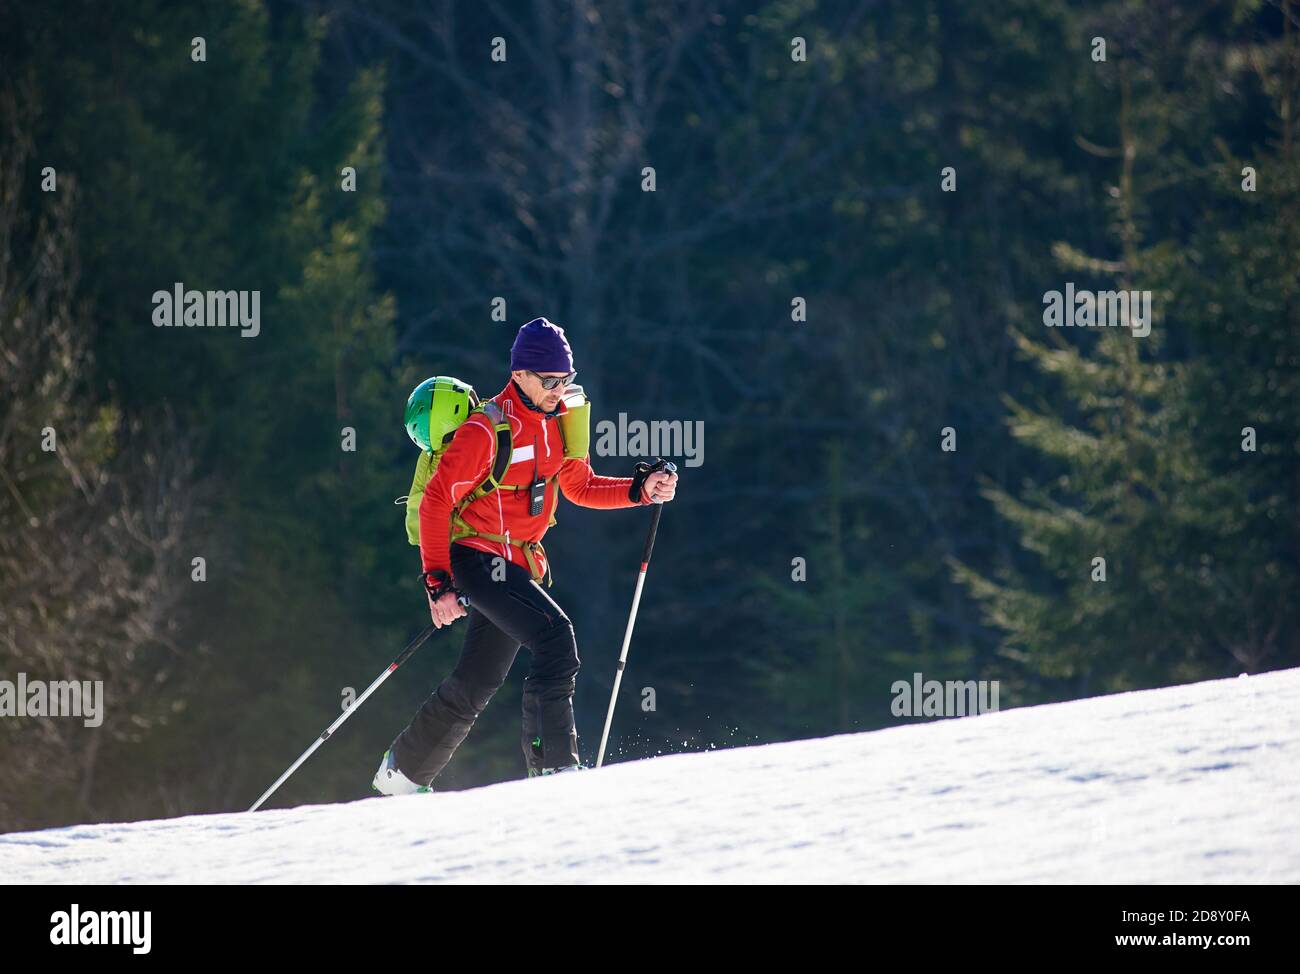 Man with ski mountaineering climb towards the summit under the lights of a sun against forest background . Ski season and winter sports concept Stock Photo